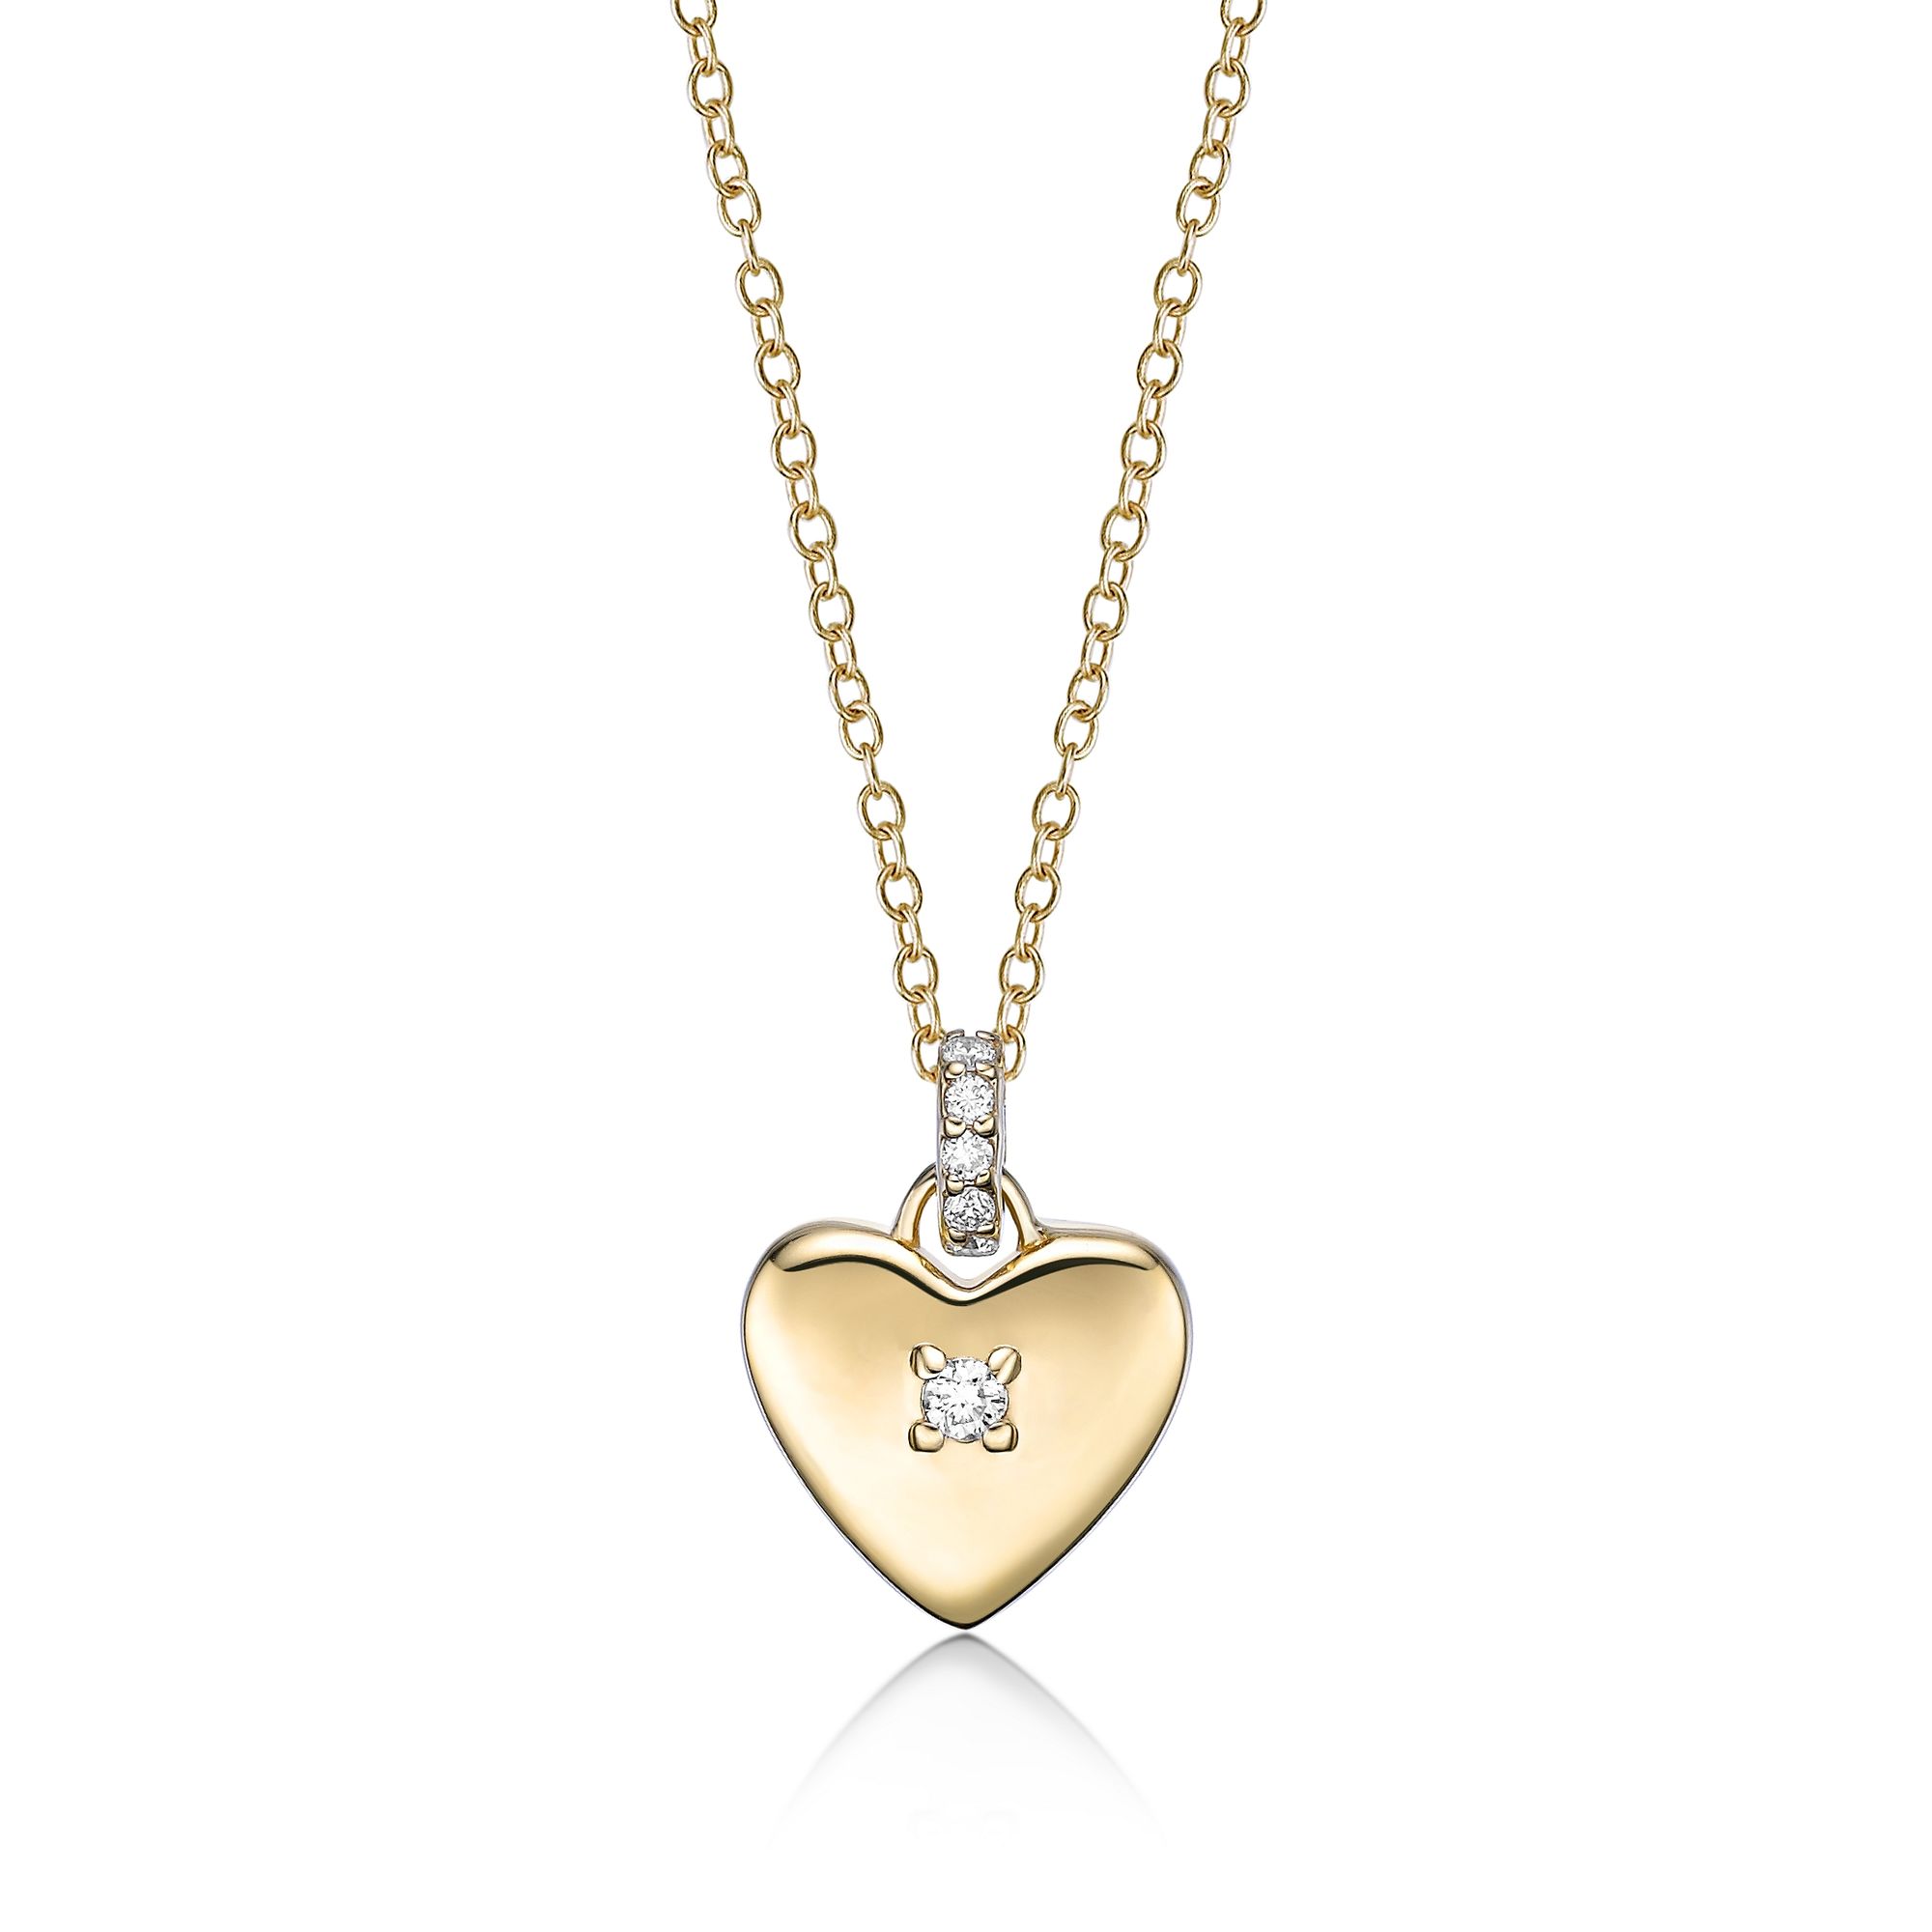 Women's Lab Grown Diamond Heart Pendant Necklace in 18K Yellow Gold-Plated Sterling Silver with Lobster Clasp, 0.36 Carat, 18" Cable Chain | Lavari Jewelers